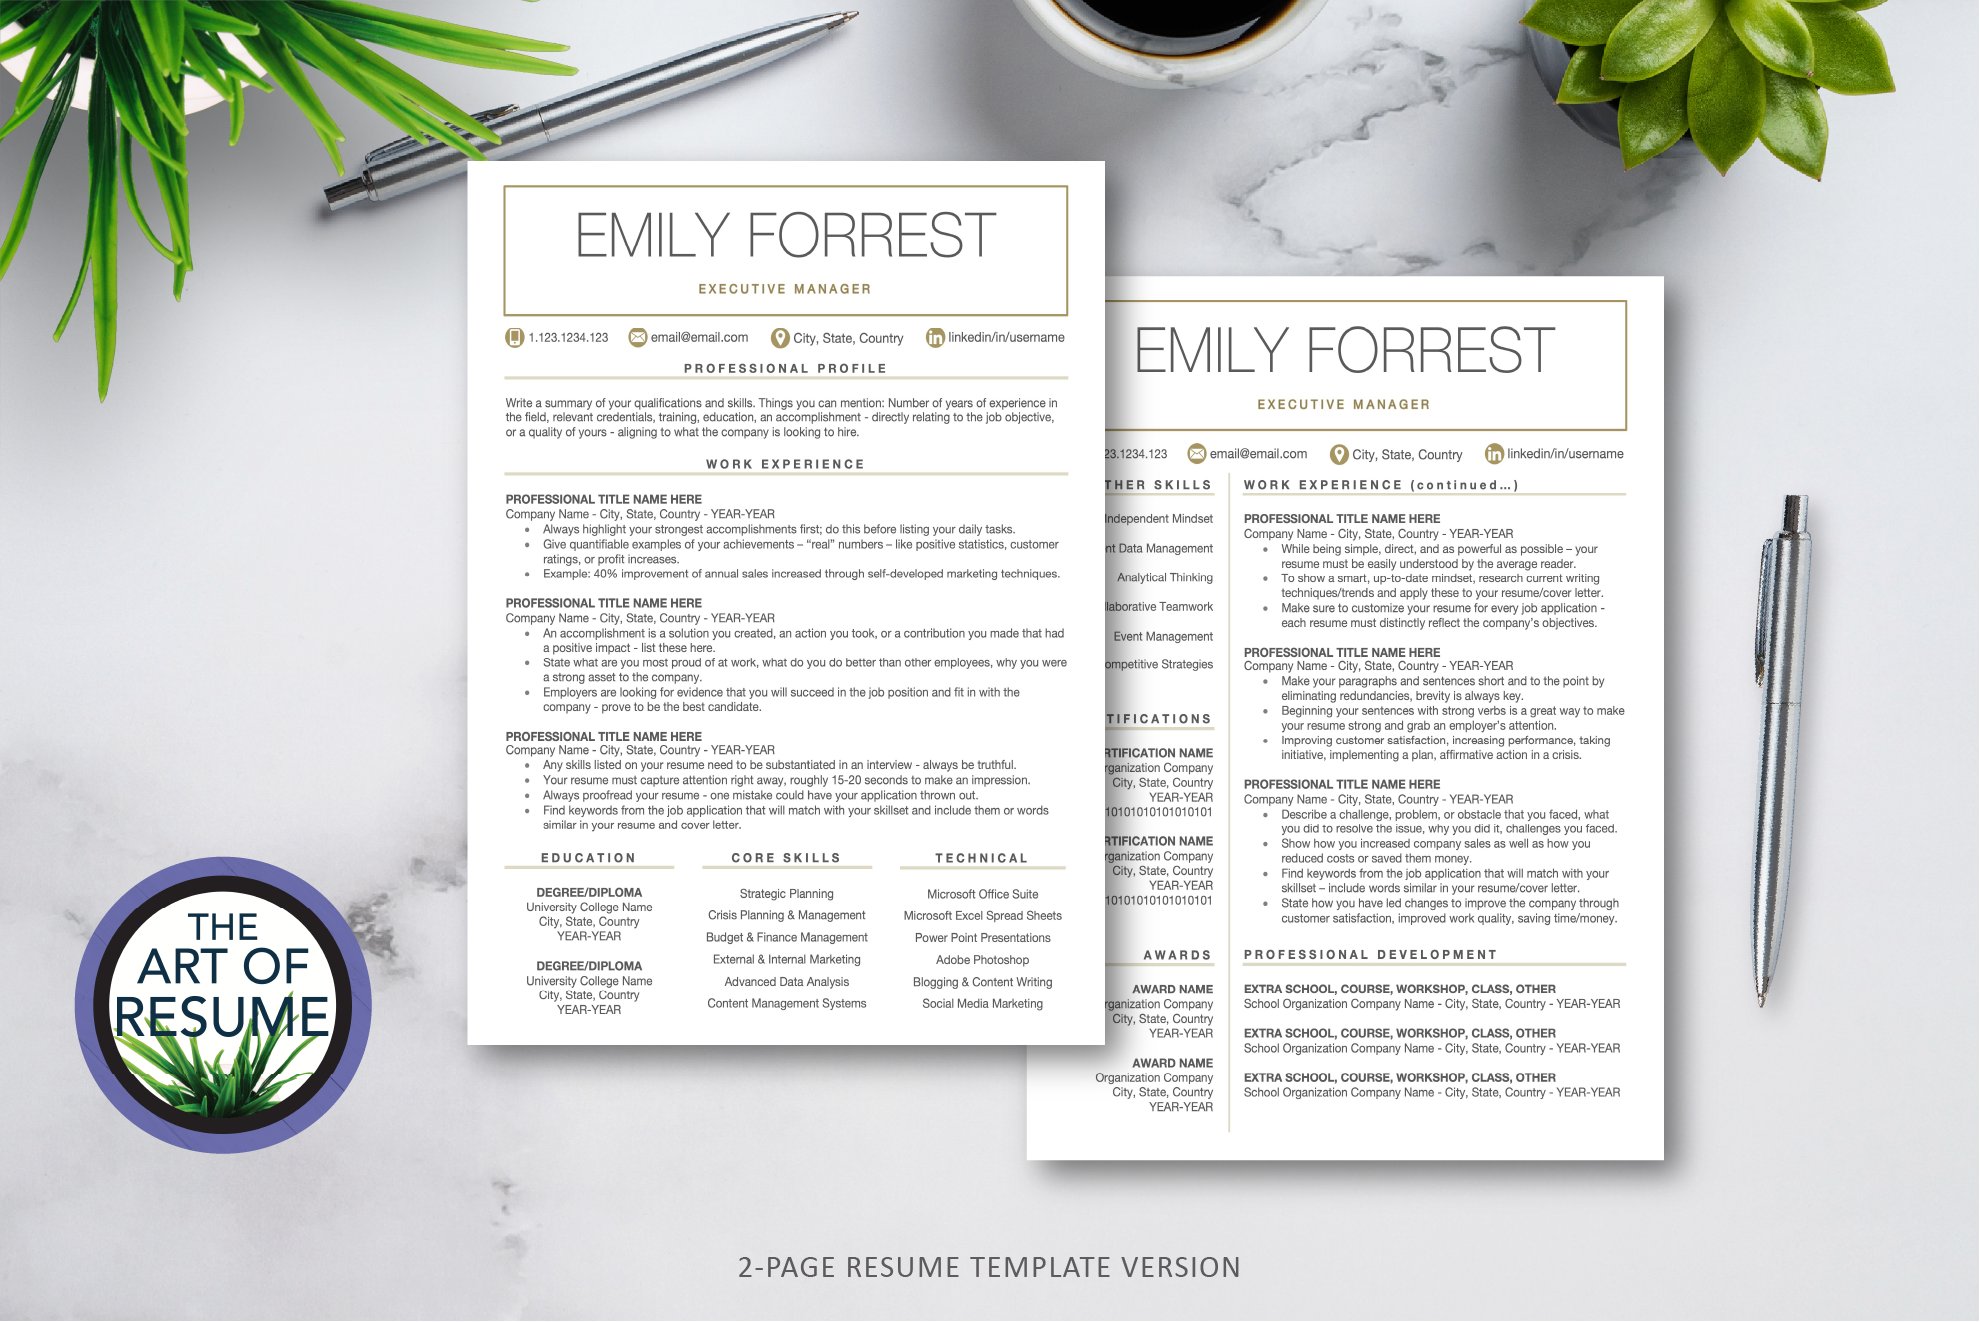 3 two resume template 491